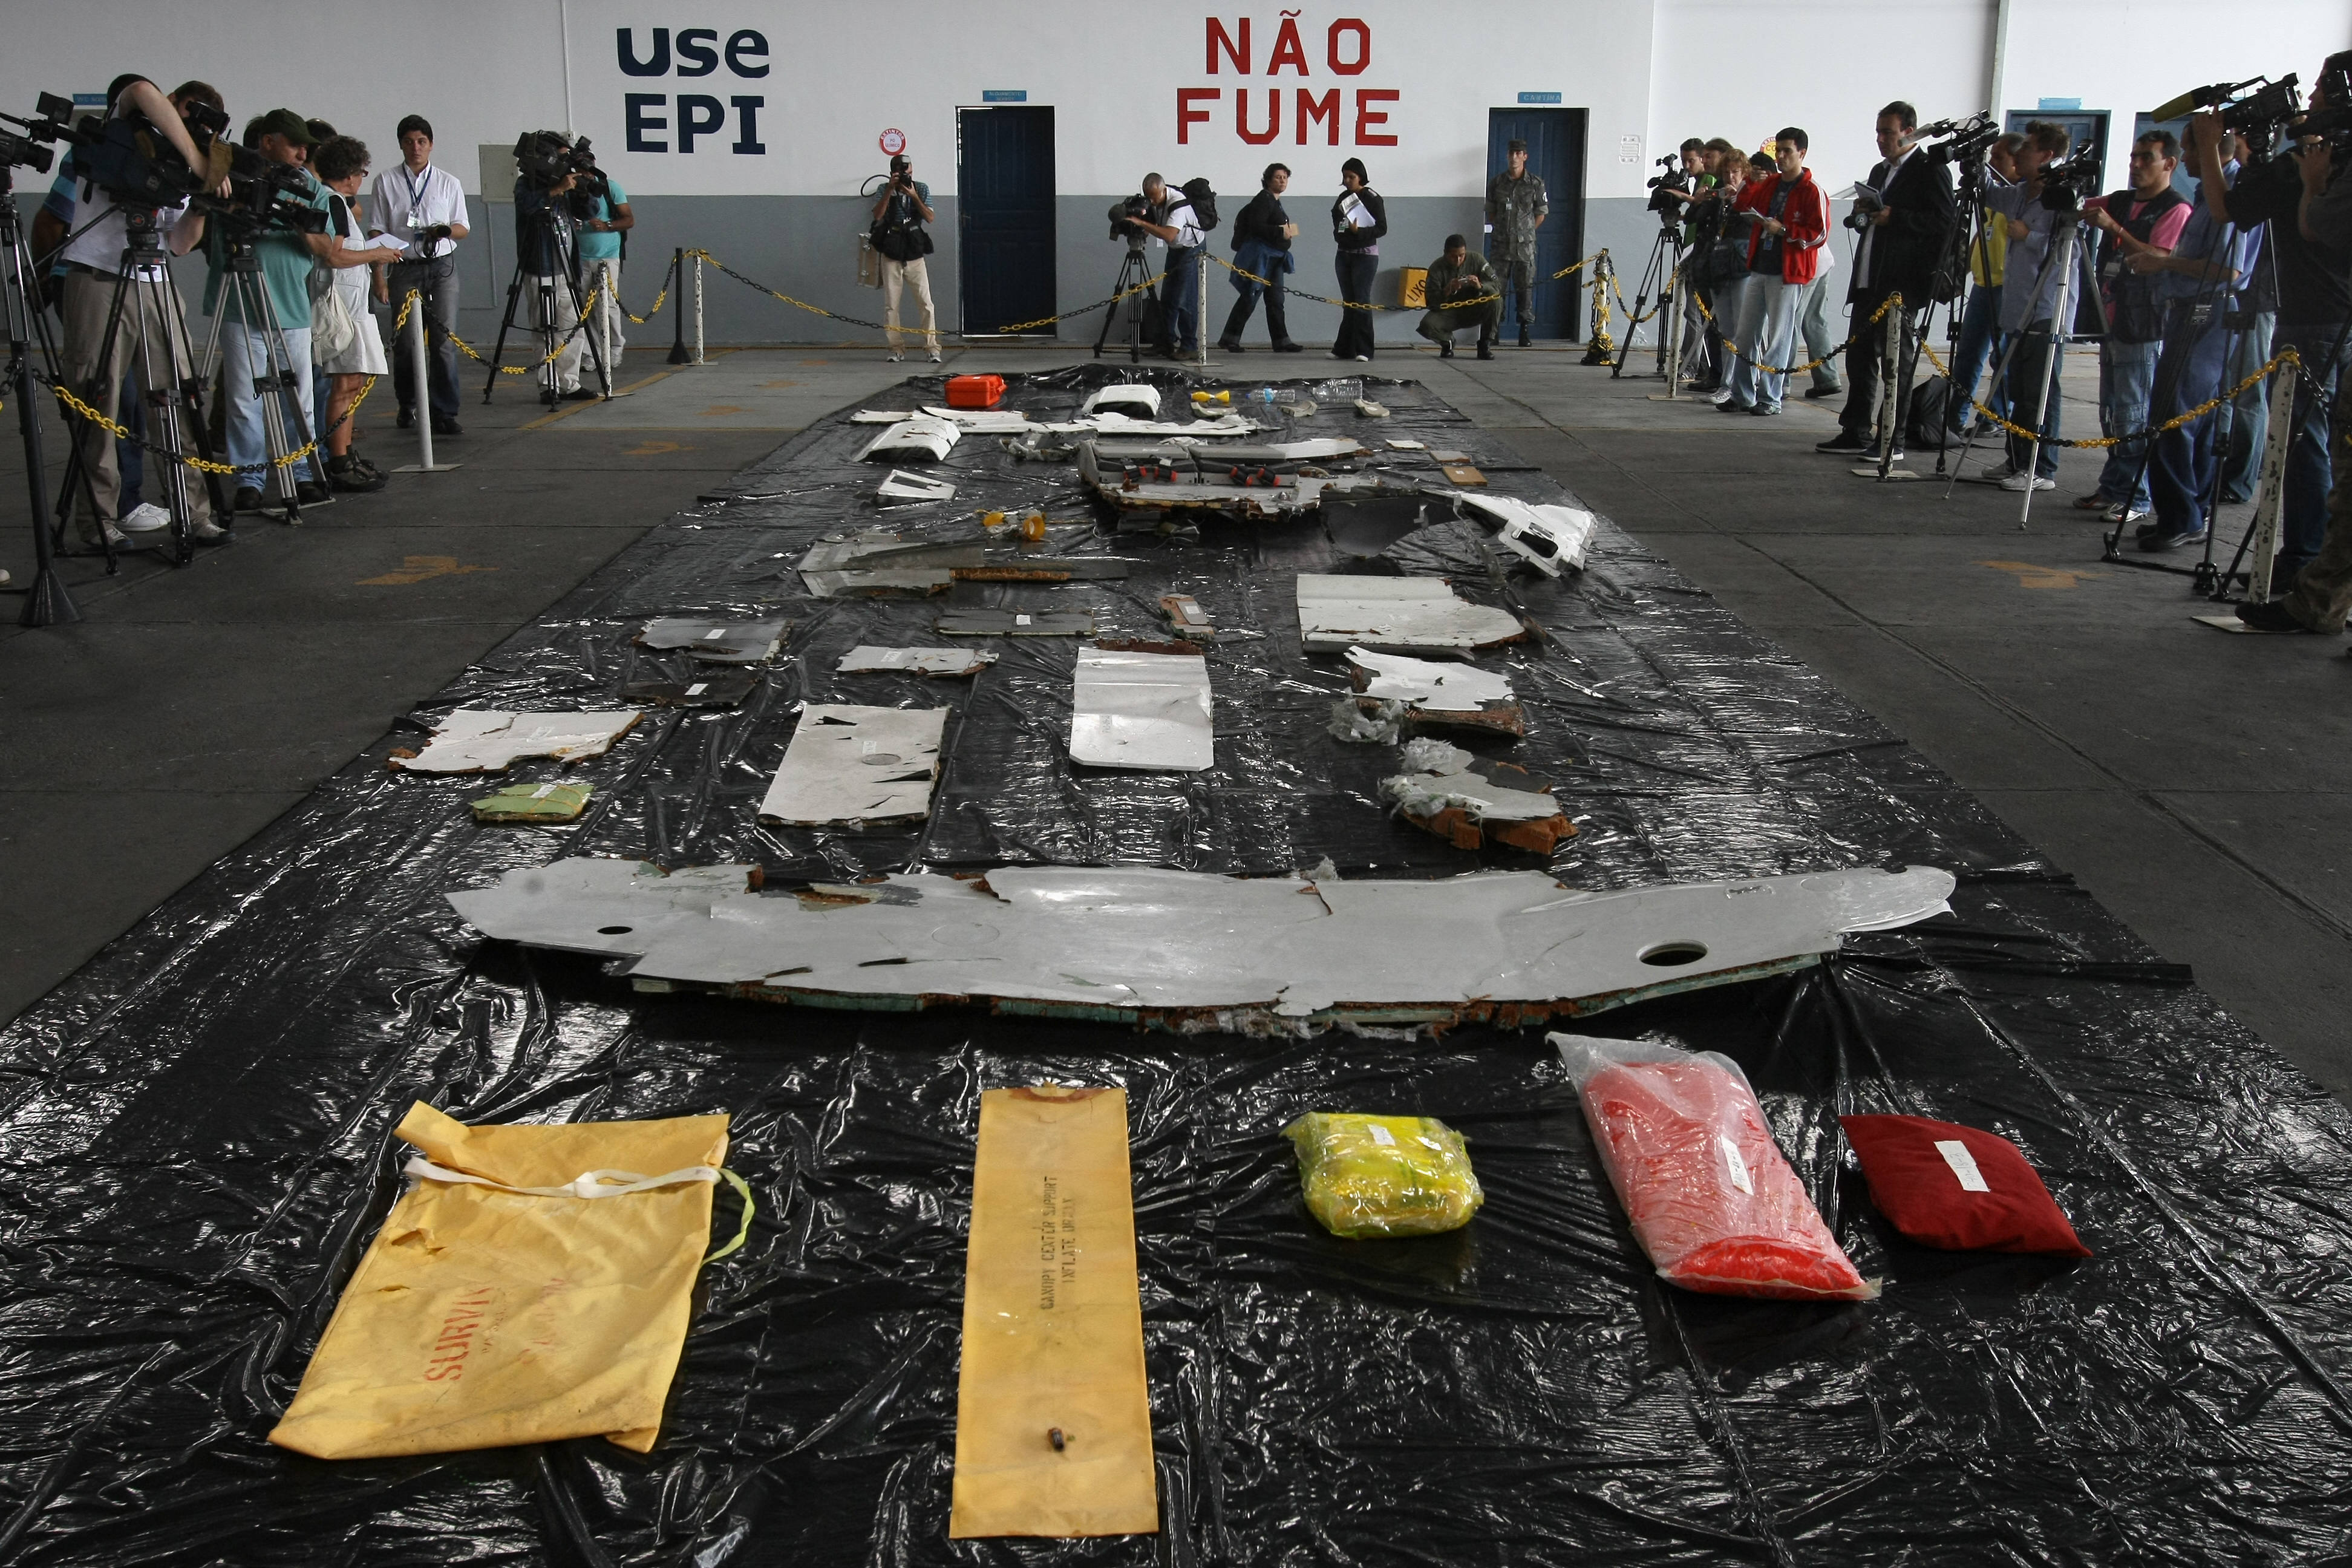 Wreckage pieces from the Air France A330 aircraft, flight AF447 that crashed in 2009 | Source: Getty Images